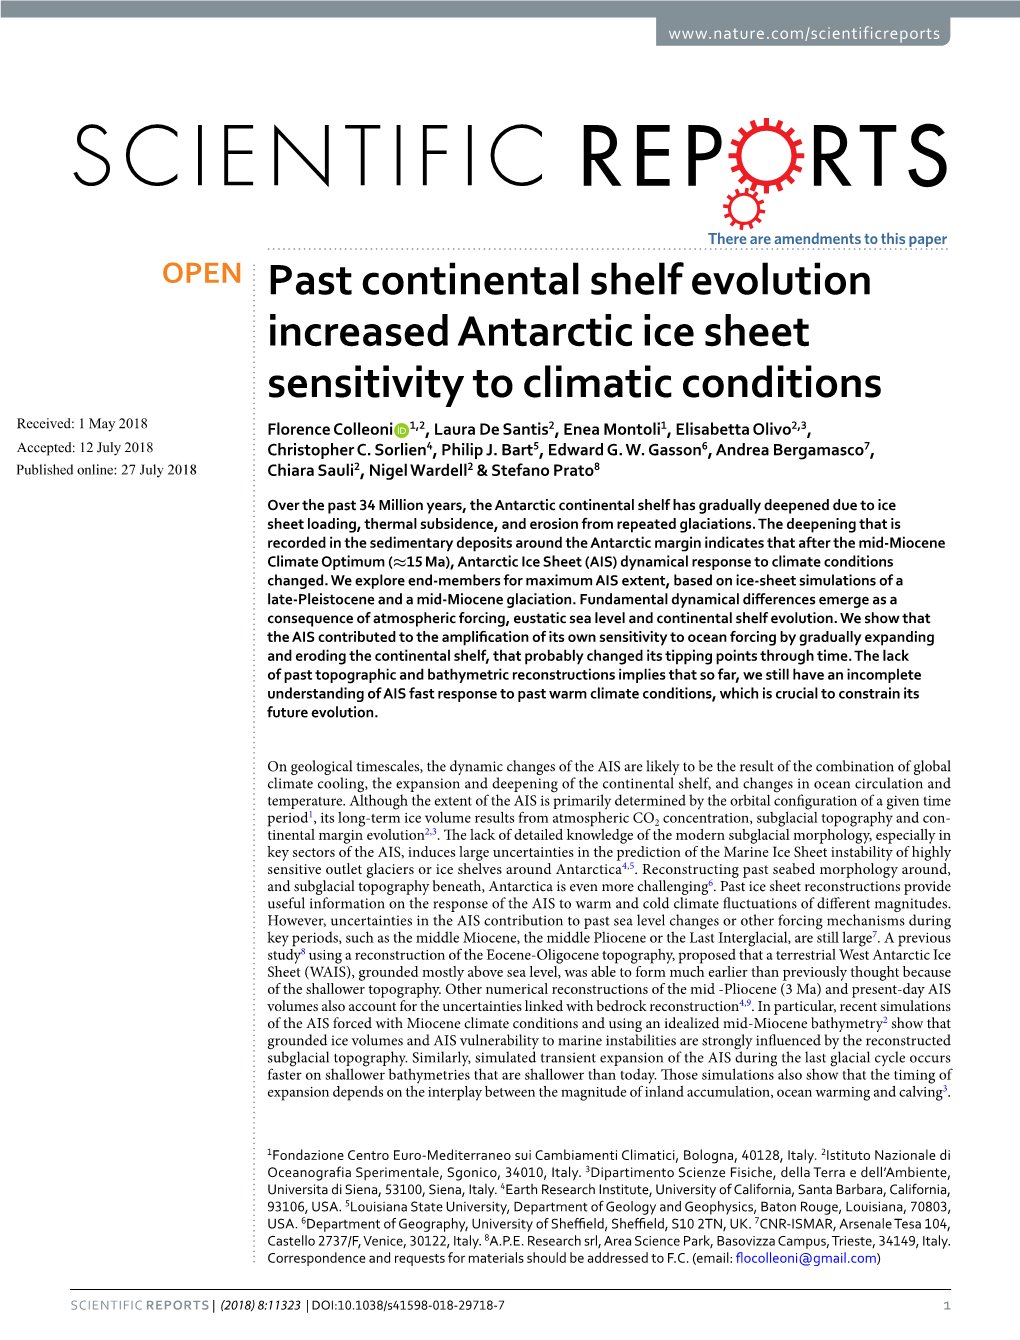 Past Continental Shelf Evolution Increased Antarctic Ice Sheet Sensitivity to Climatic Conditions